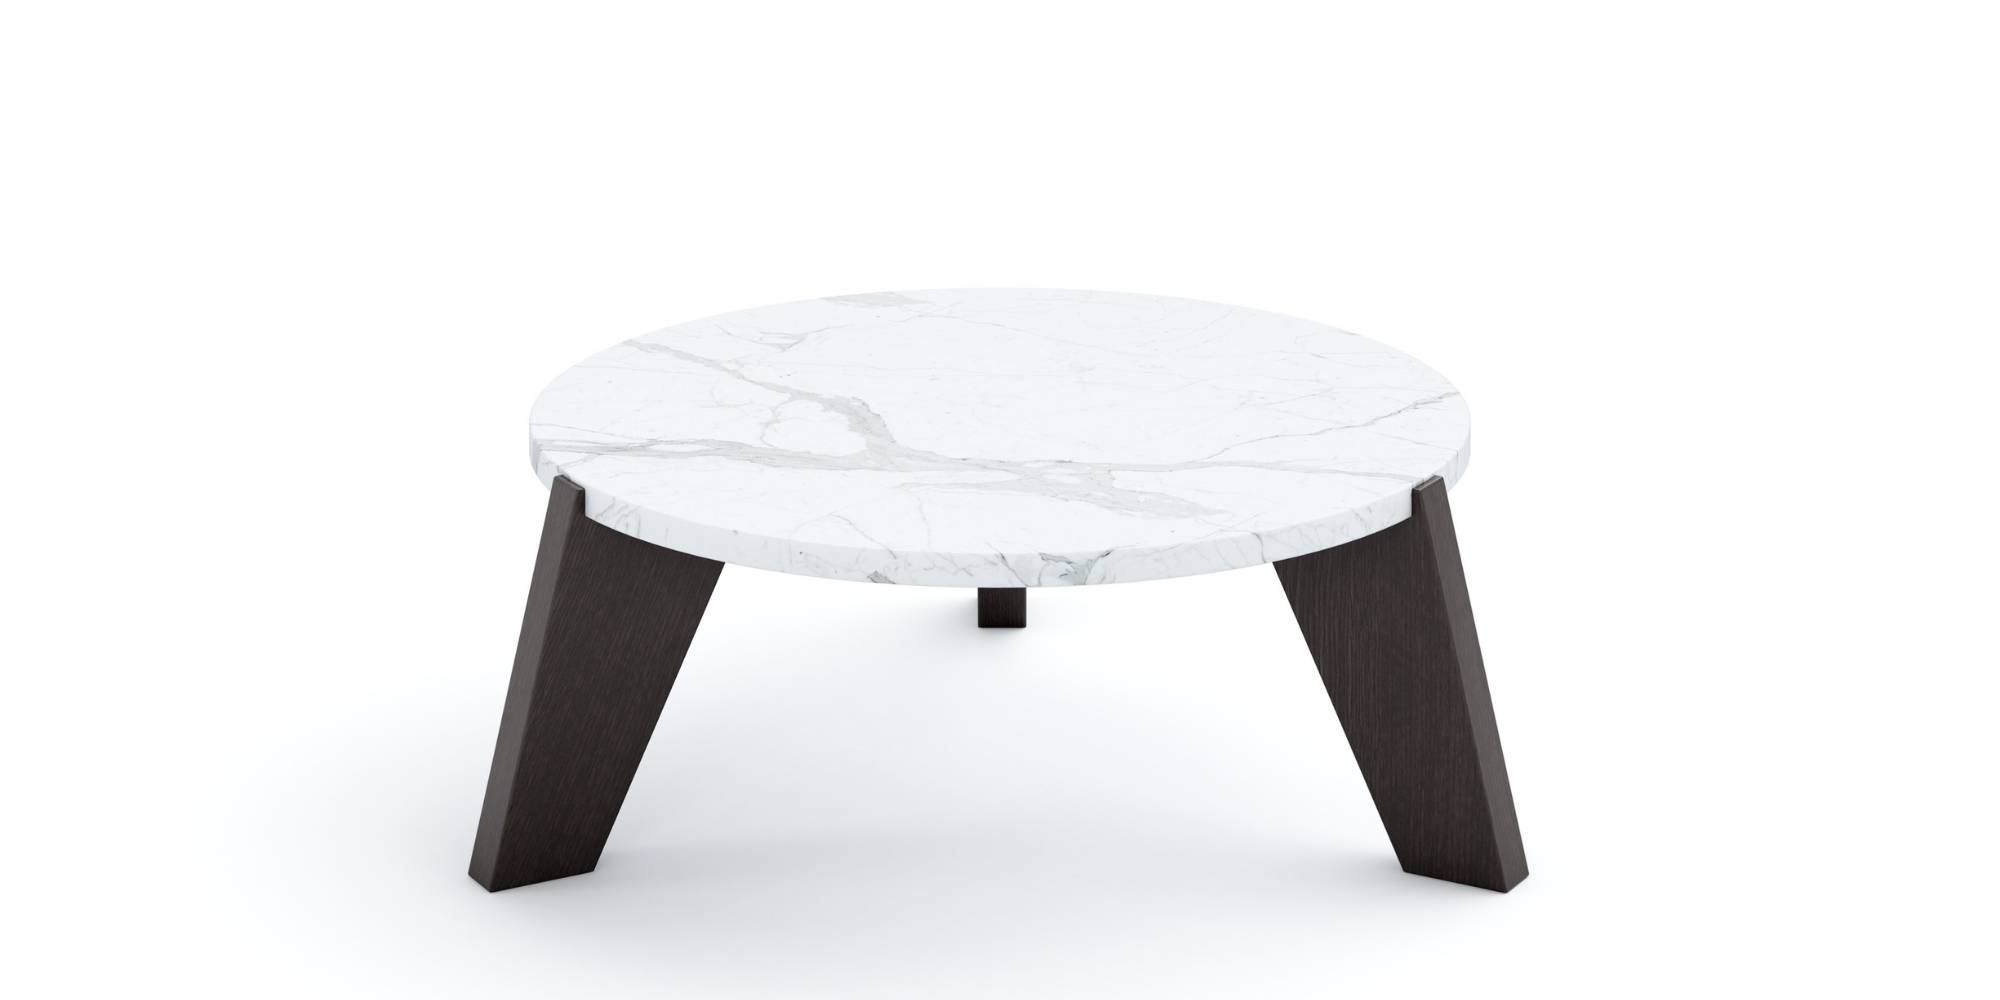 Perseus Porcelain Rectangular Dining Table in Outdoor Tables Dining Tables for Asteri collection